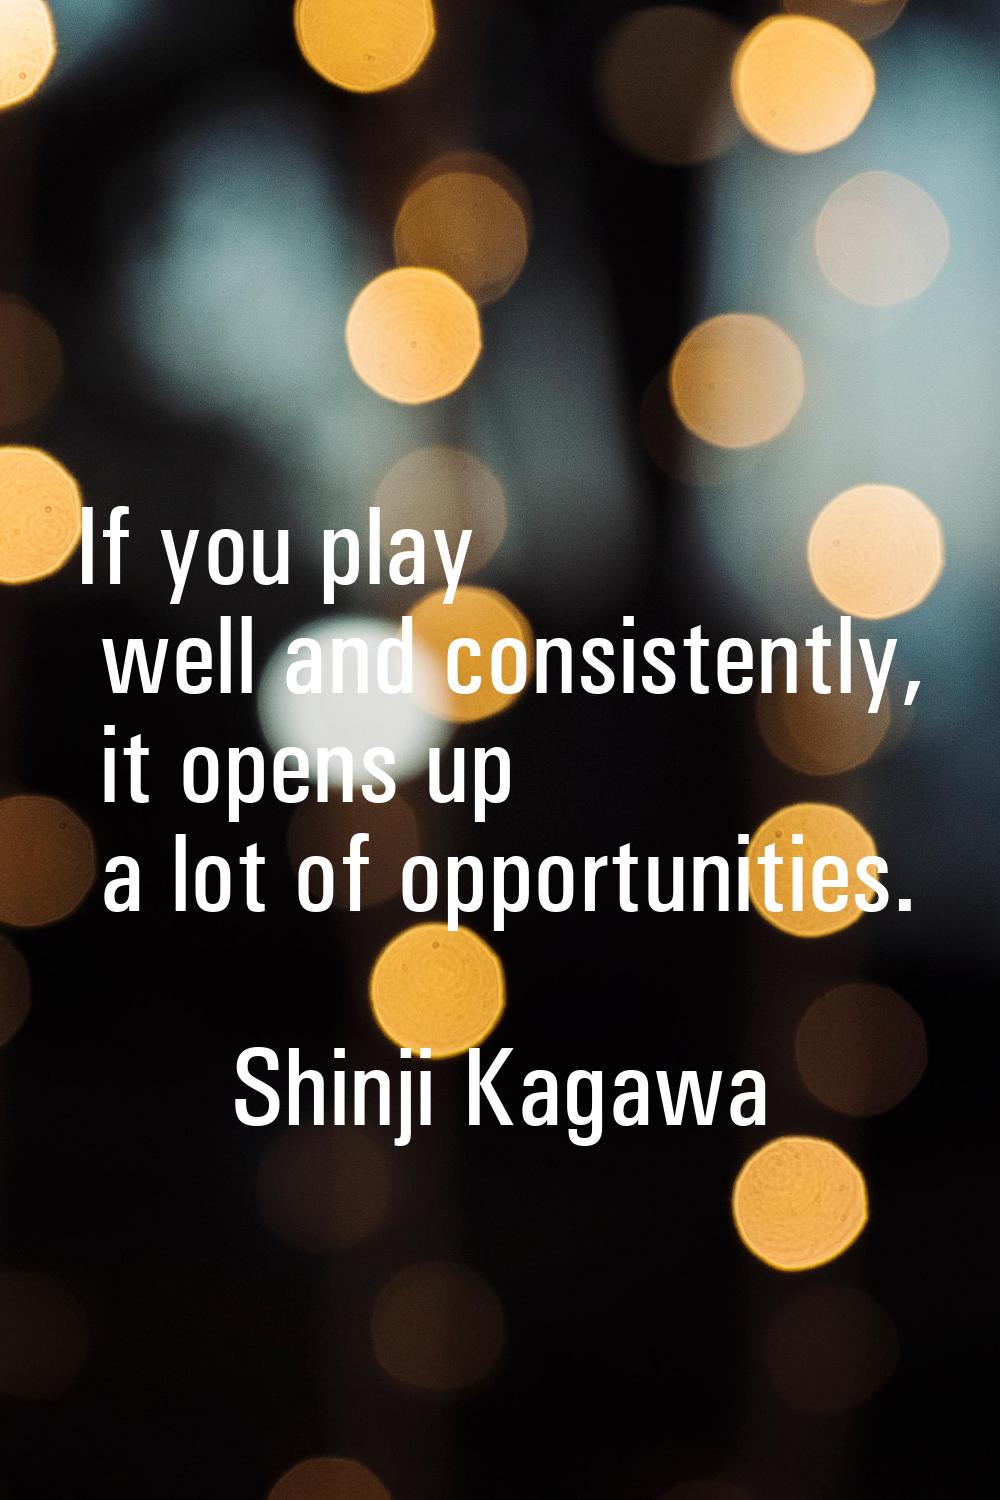 If you play well and consistently, it opens up a lot of opportunities.